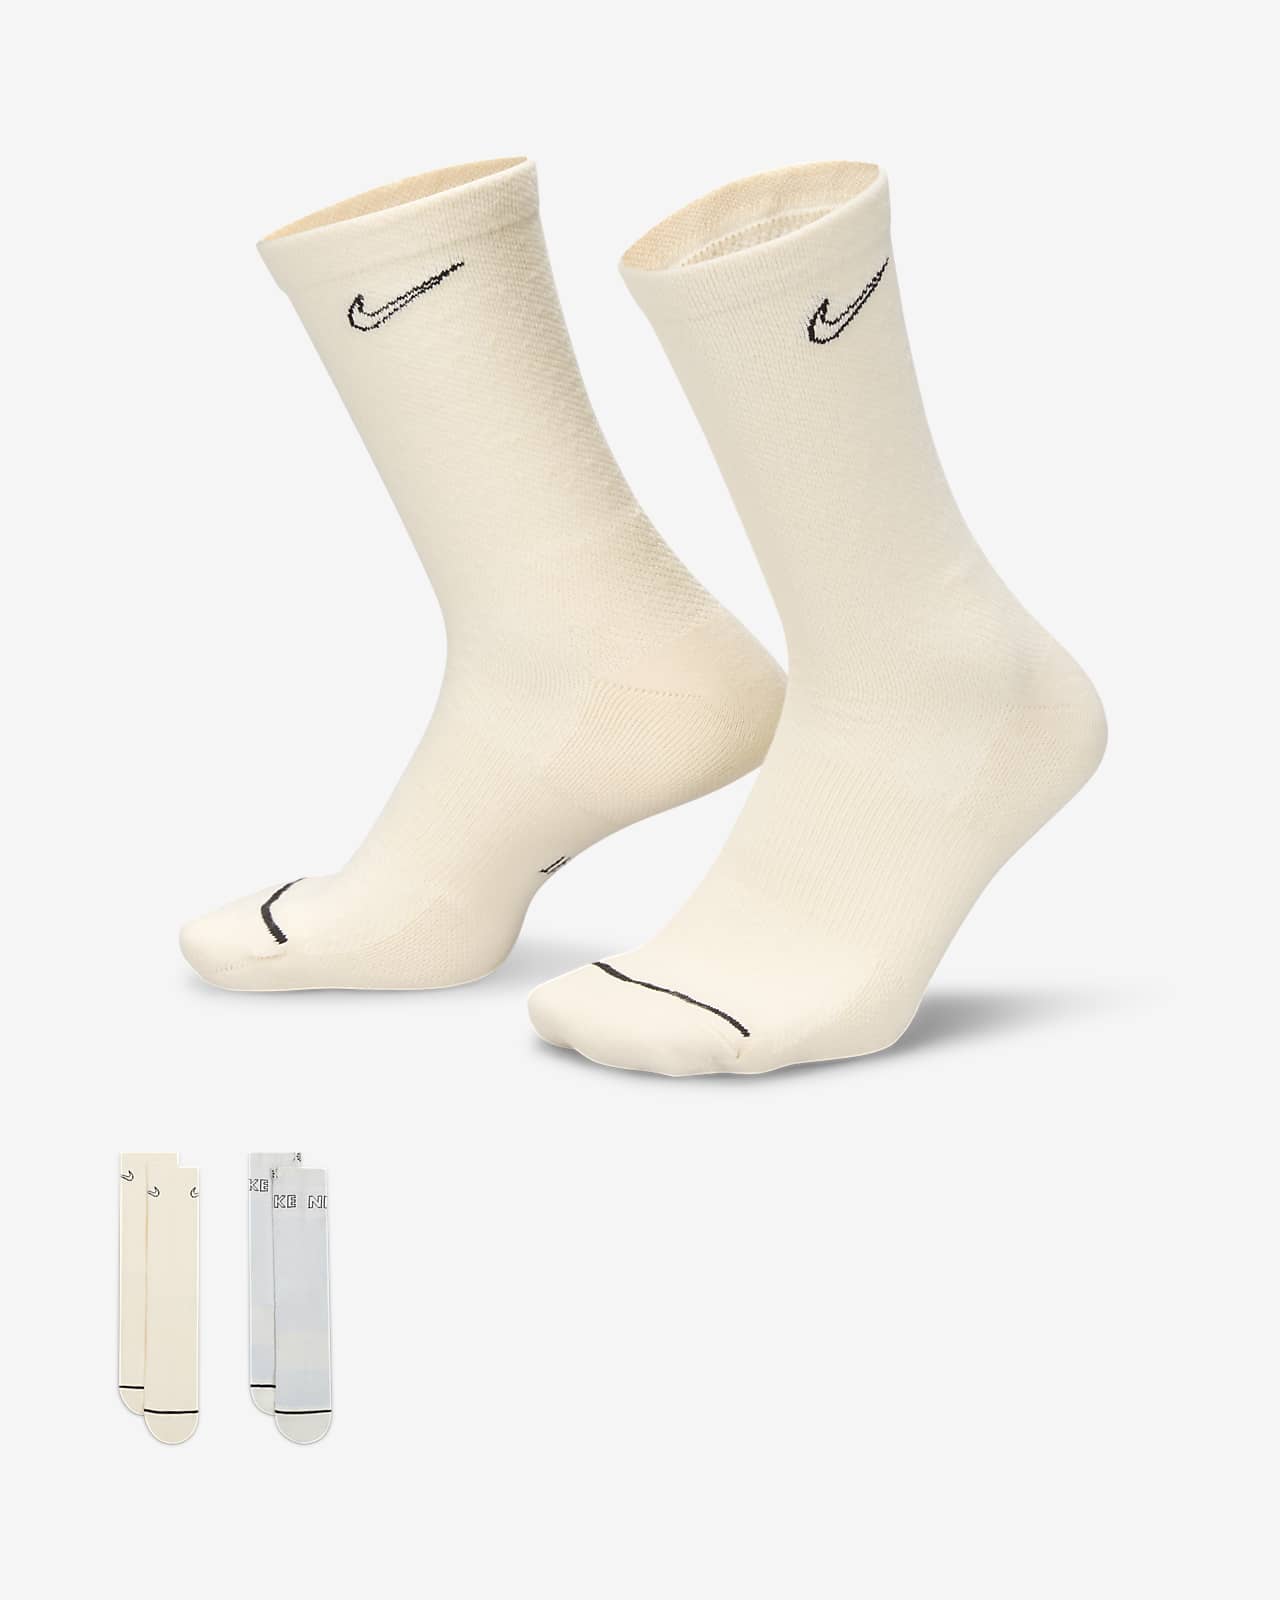 Nike Everyday Plus Cushioned Calcetines largos (2 pares)